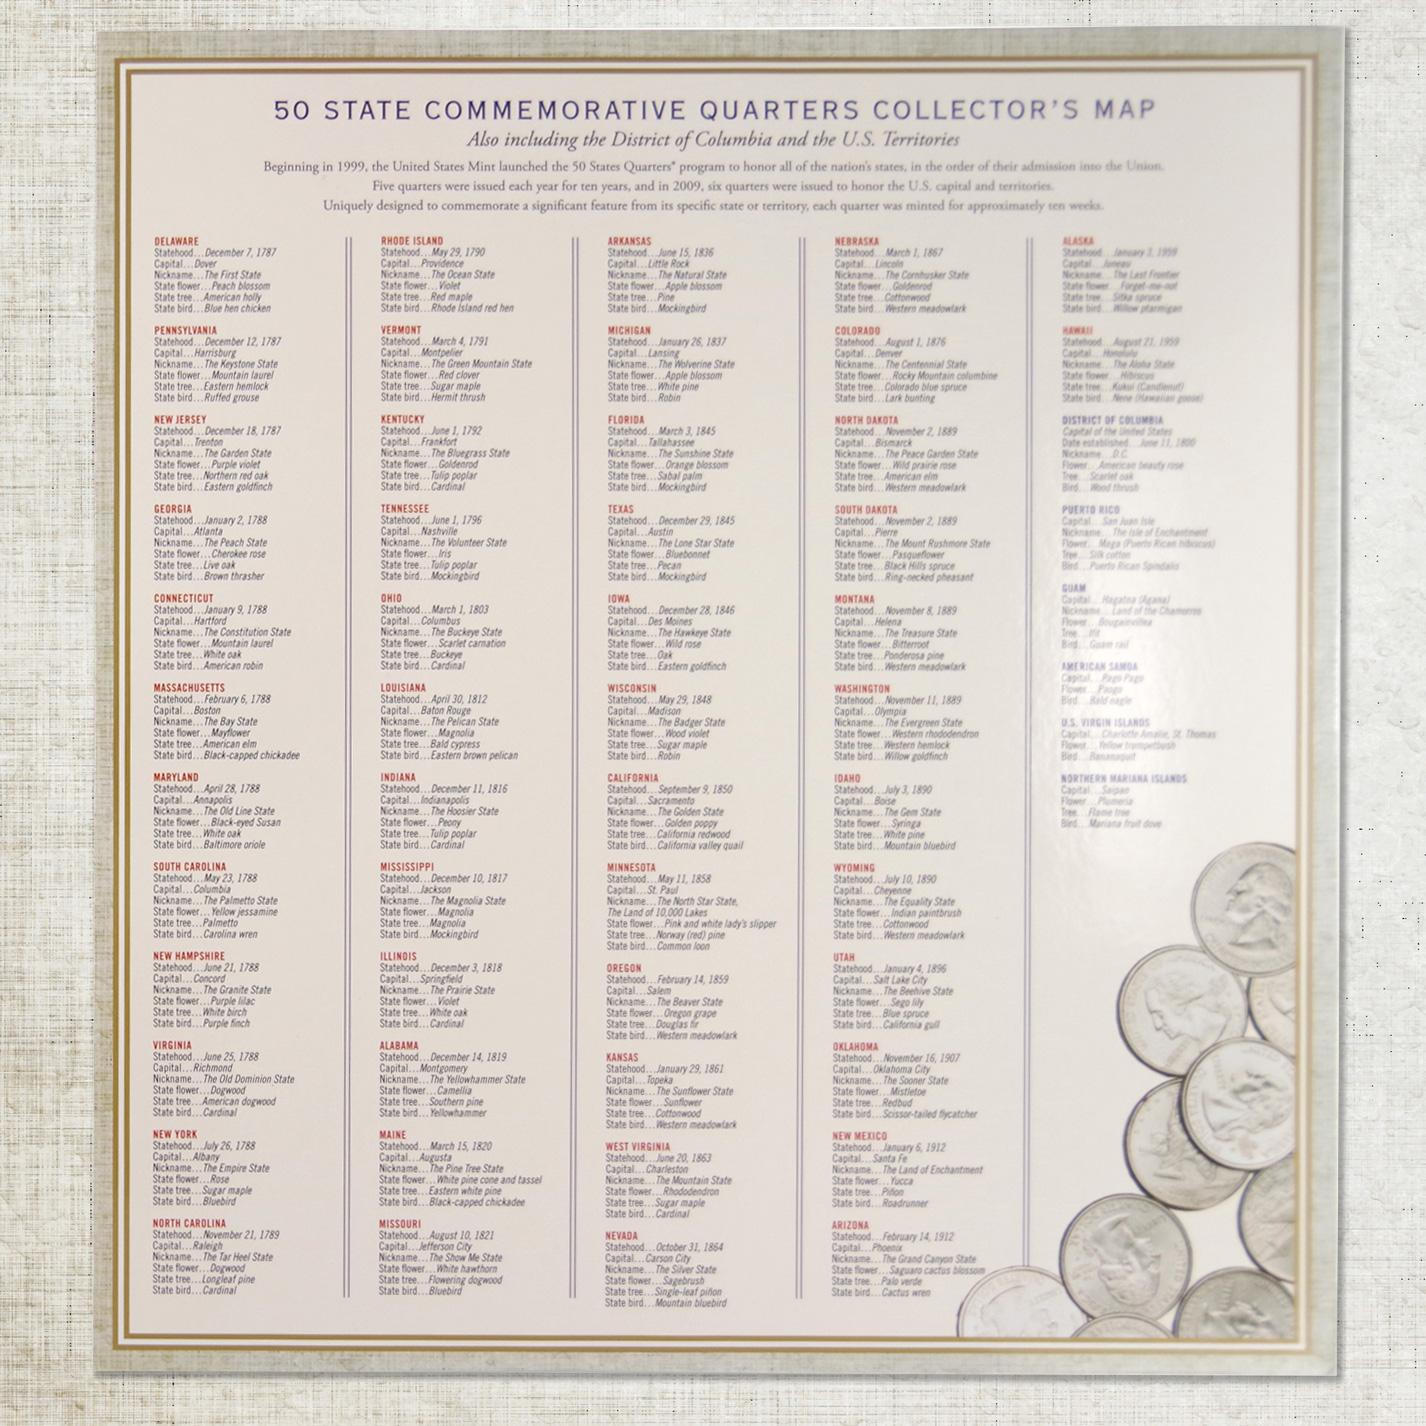 50 State Commemorative Quarters Collector's Map A2Z Science